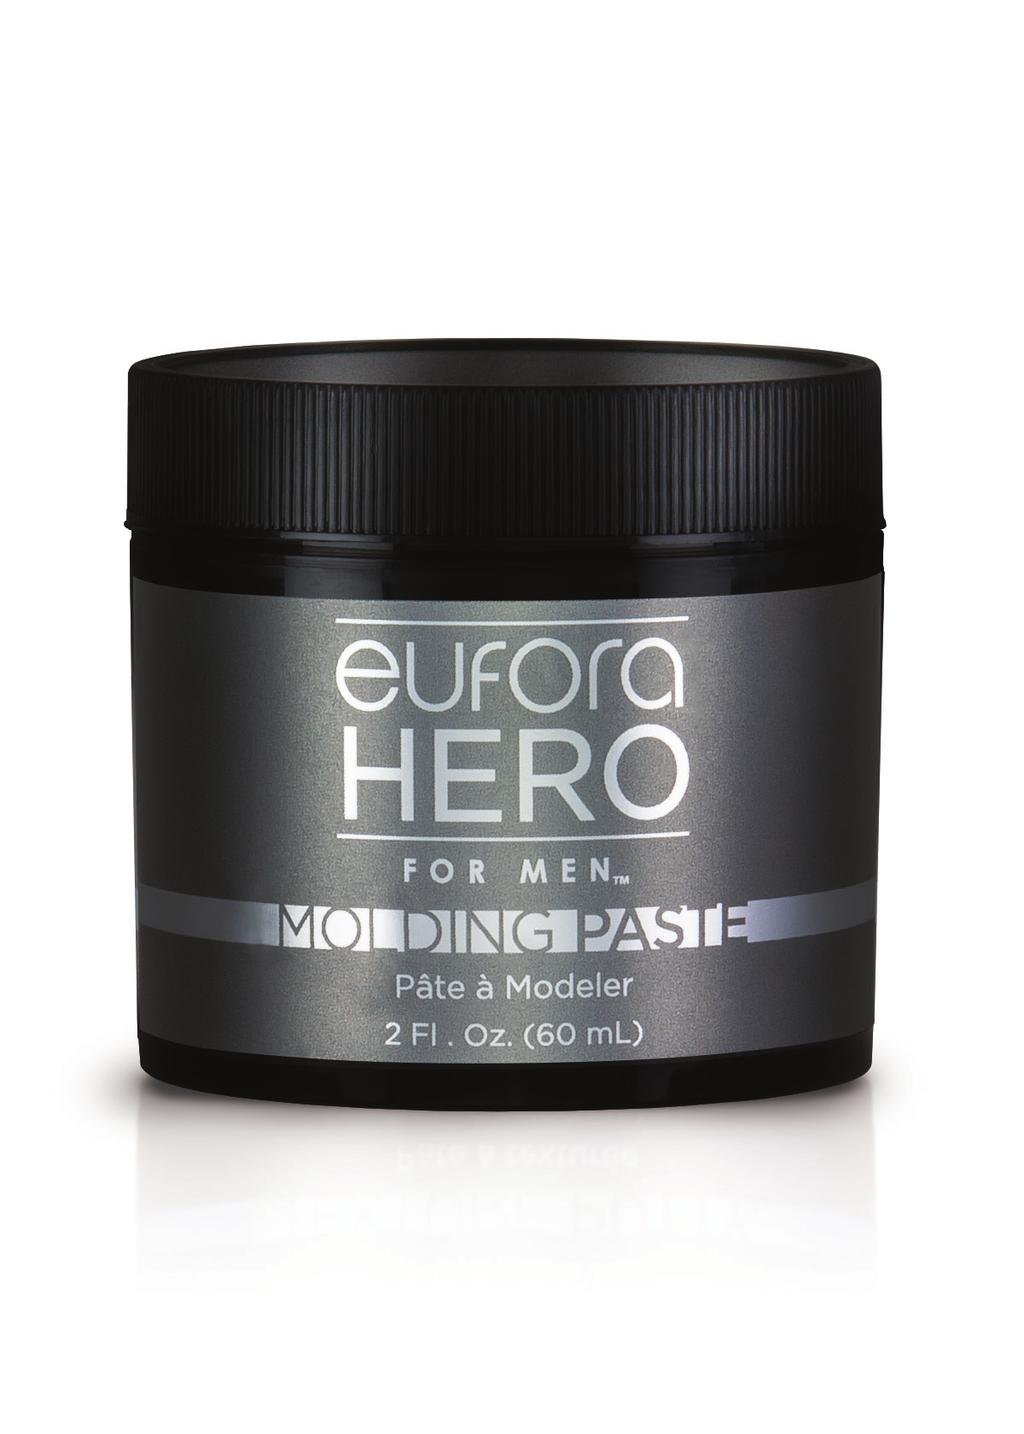 MOLDING PASTE A medium pliable hold styling paste. Delivers texture and body with a medium pliable hold and natural finish.